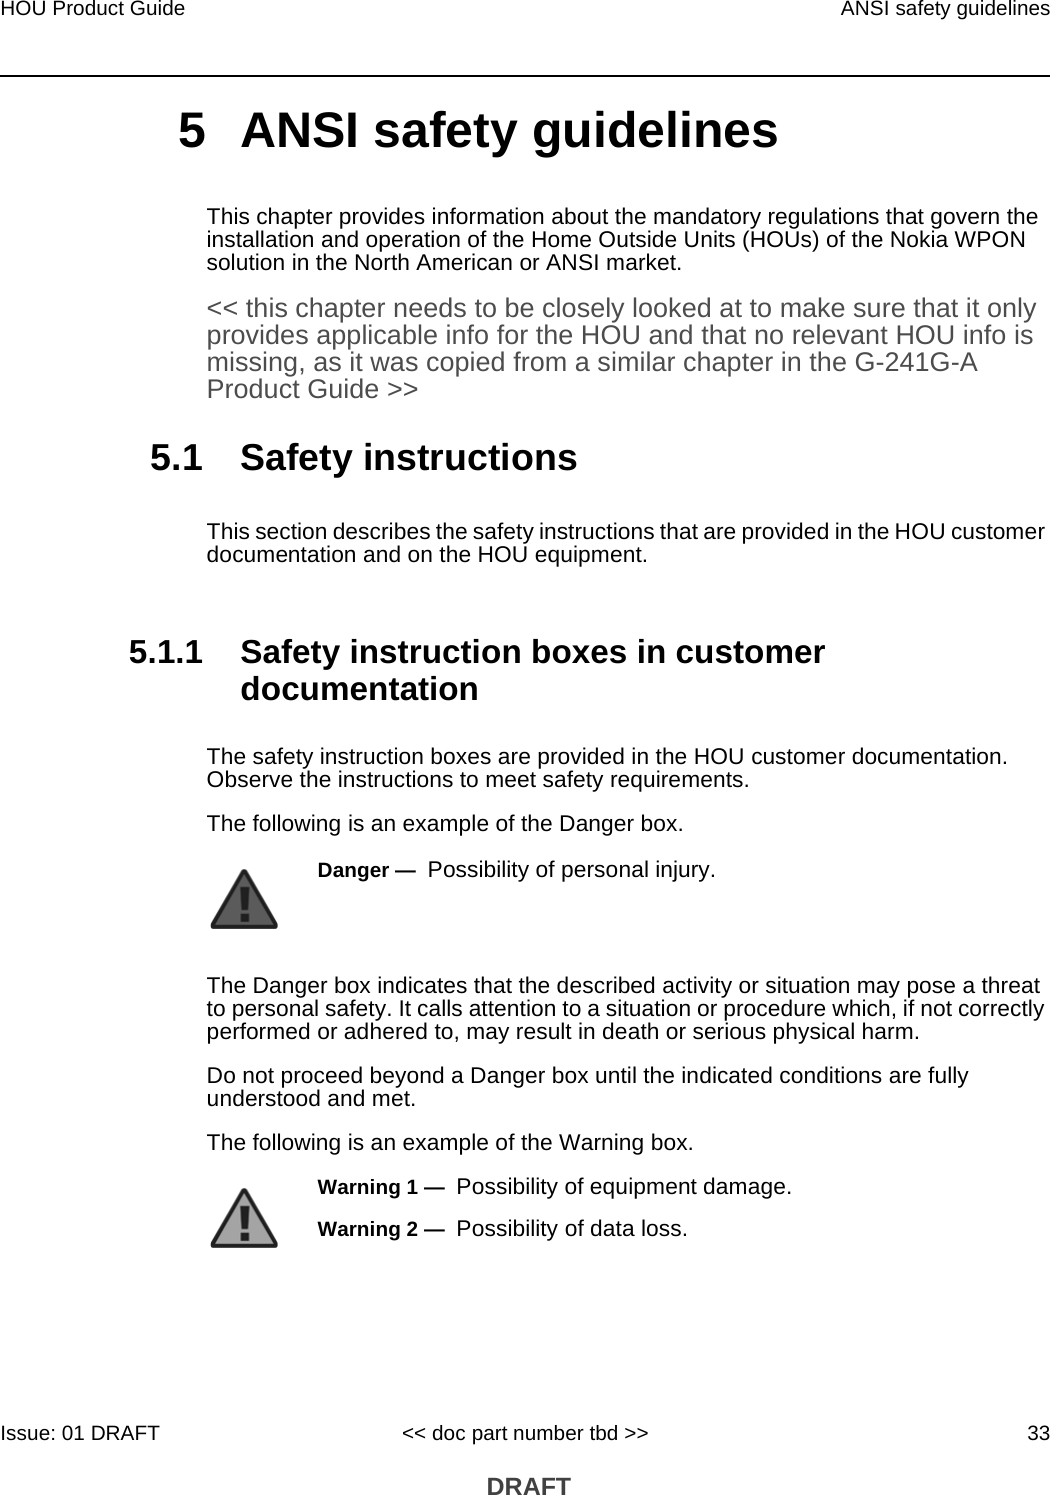 HOU Product Guide ANSI safety guidelinesIssue: 01 DRAFT &lt;&lt; doc part number tbd &gt;&gt; 33 DRAFT5 ANSI safety guidelinesThis chapter provides information about the mandatory regulations that govern the installation and operation of the Home Outside Units (HOUs) of the Nokia WPON solution in the North American or ANSI market.&lt;&lt; this chapter needs to be closely looked at to make sure that it only provides applicable info for the HOU and that no relevant HOU info is missing, as it was copied from a similar chapter in the G-241G-A Product Guide &gt;&gt;5.1 Safety instructionsThis section describes the safety instructions that are provided in the HOU customer documentation and on the HOU equipment.5.1.1 Safety instruction boxes in customer documentationThe safety instruction boxes are provided in the HOU customer documentation. Observe the instructions to meet safety requirements.The following is an example of the Danger box.The Danger box indicates that the described activity or situation may pose a threat to personal safety. It calls attention to a situation or procedure which, if not correctly performed or adhered to, may result in death or serious physical harm. Do not proceed beyond a Danger box until the indicated conditions are fully understood and met.The following is an example of the Warning box.Danger —  Possibility of personal injury. Warning 1 —  Possibility of equipment damage.Warning 2 —  Possibility of data loss.